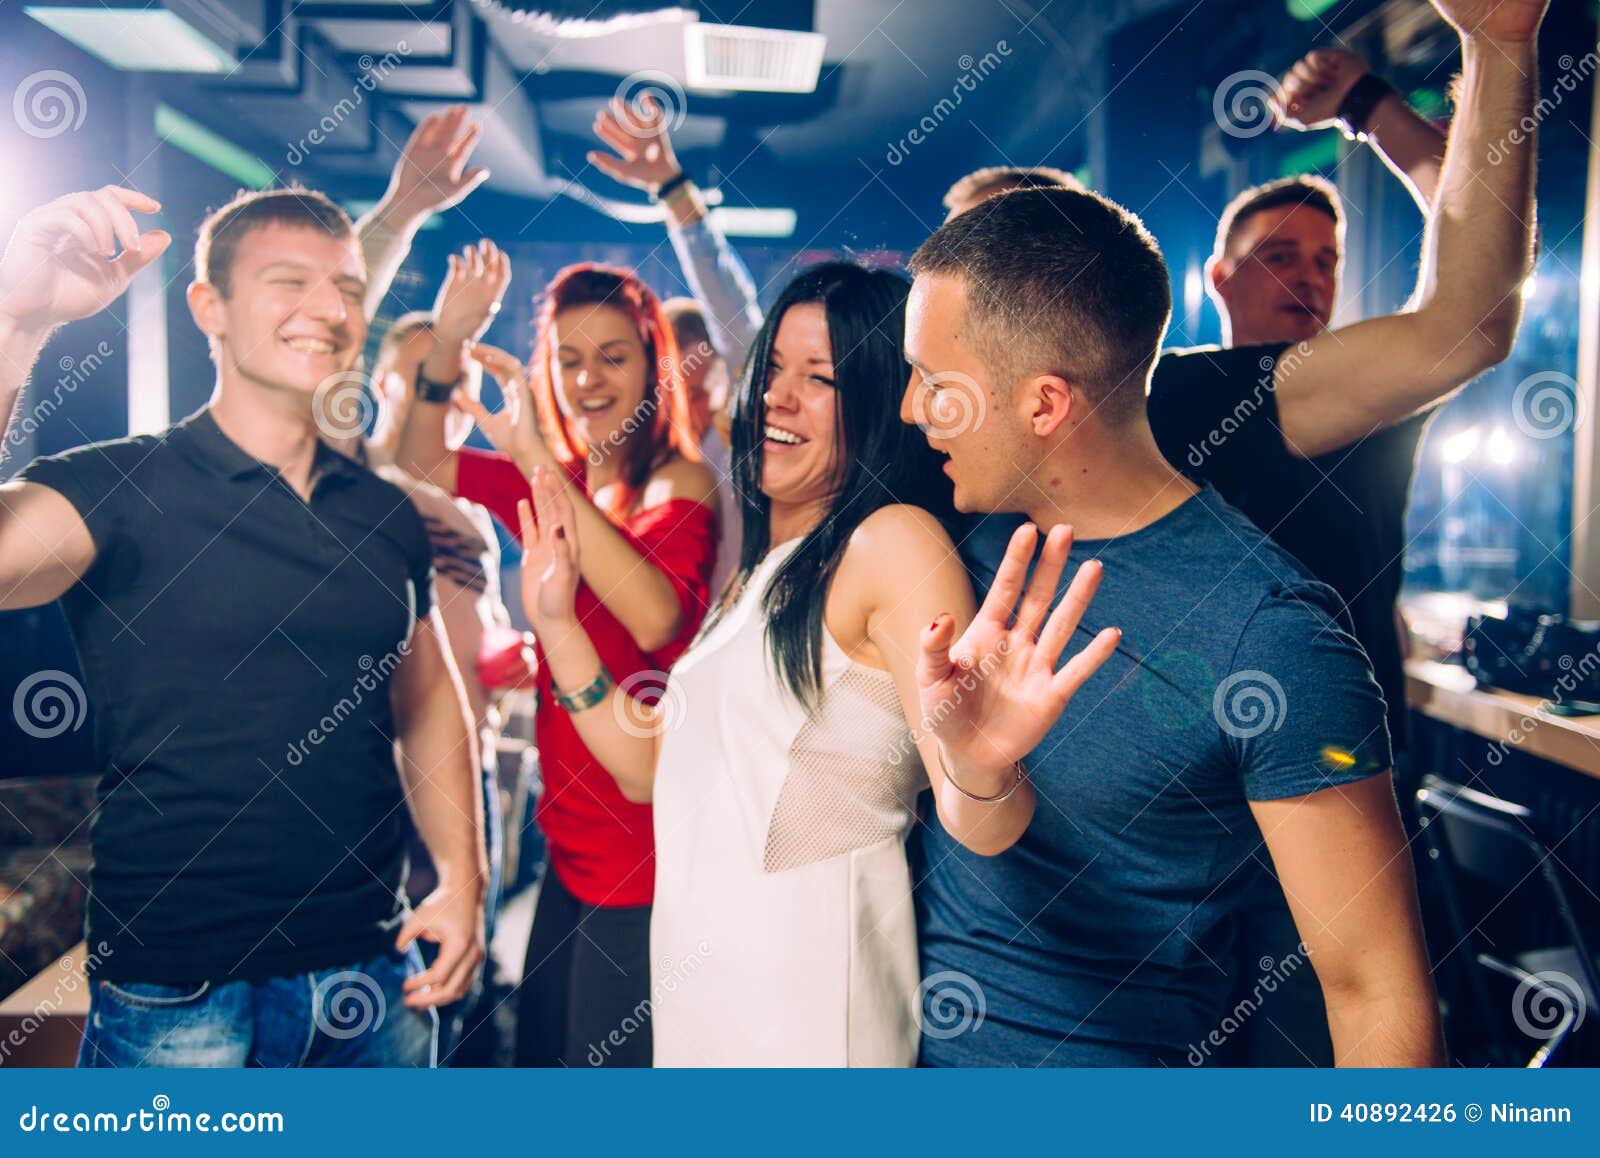 Party people stock photo. Image of adult, indoor, moving - 40892426